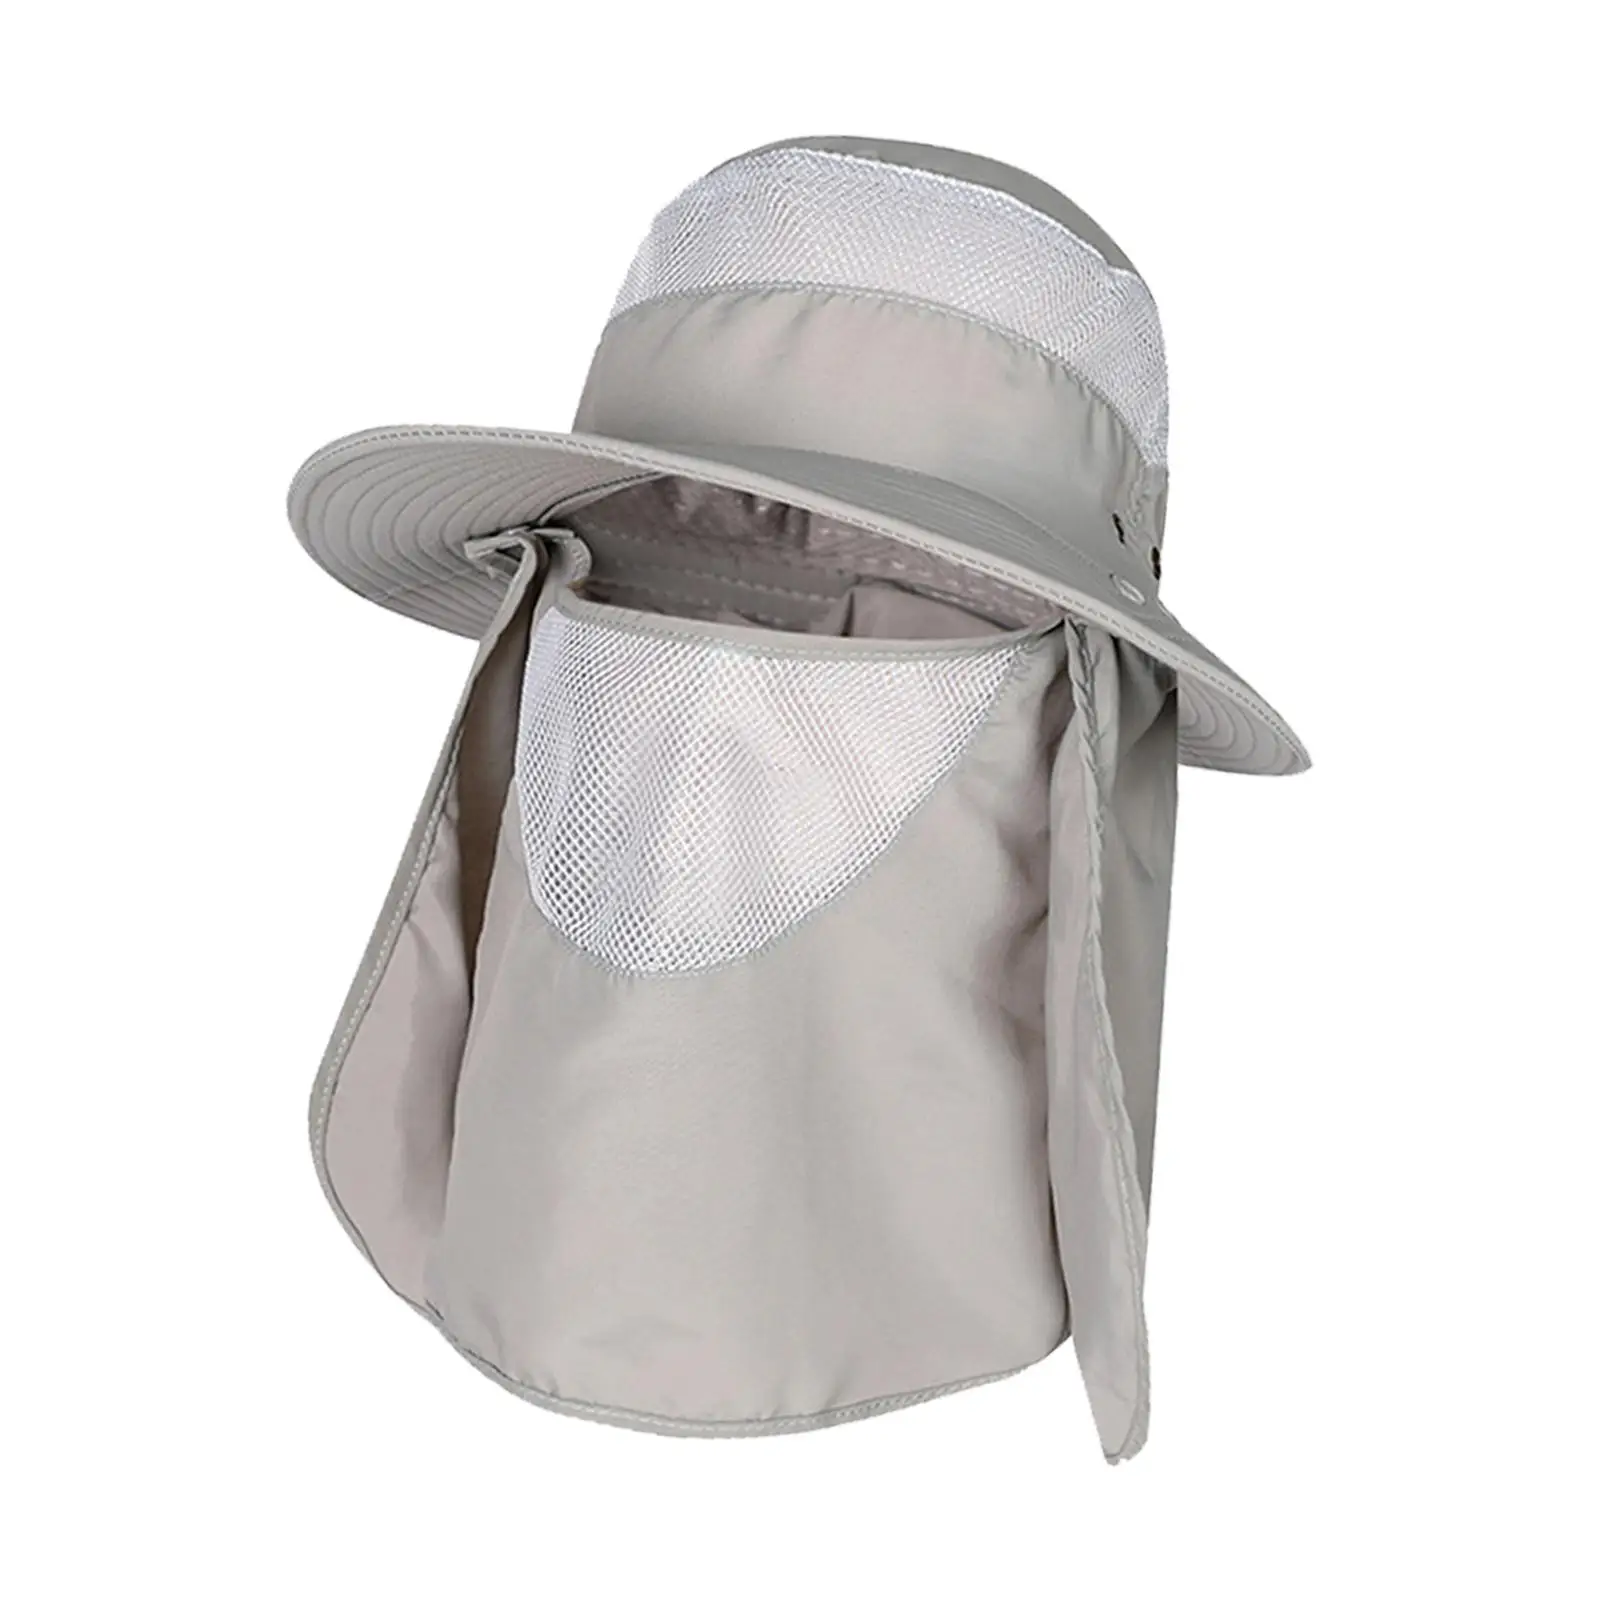 Fishing Hats Sun Hat Face Cover Visor Sun Protection with Detachable Neck Cap